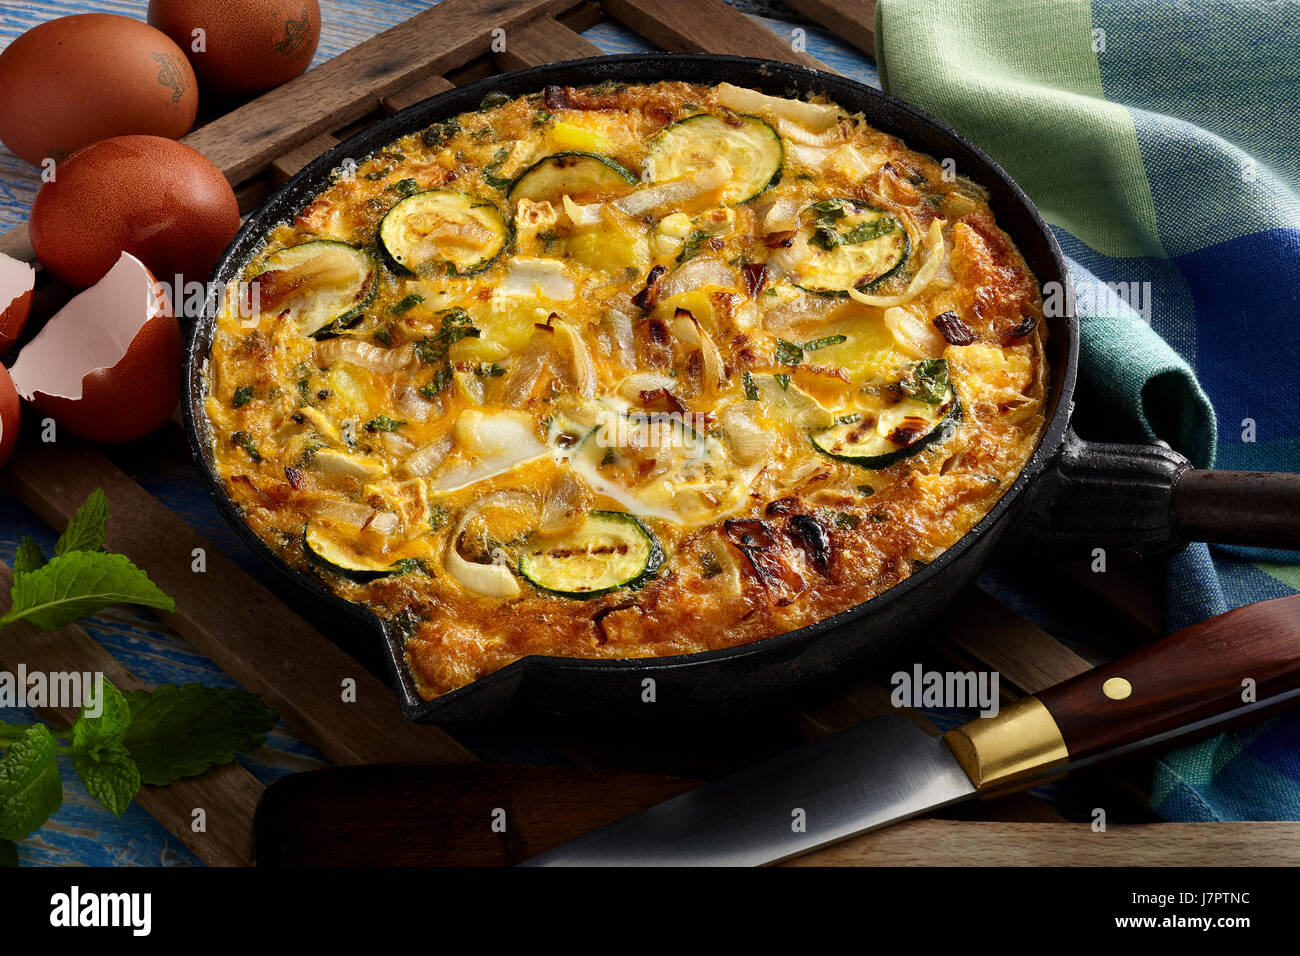 Courgette mint frittata Stock Photo